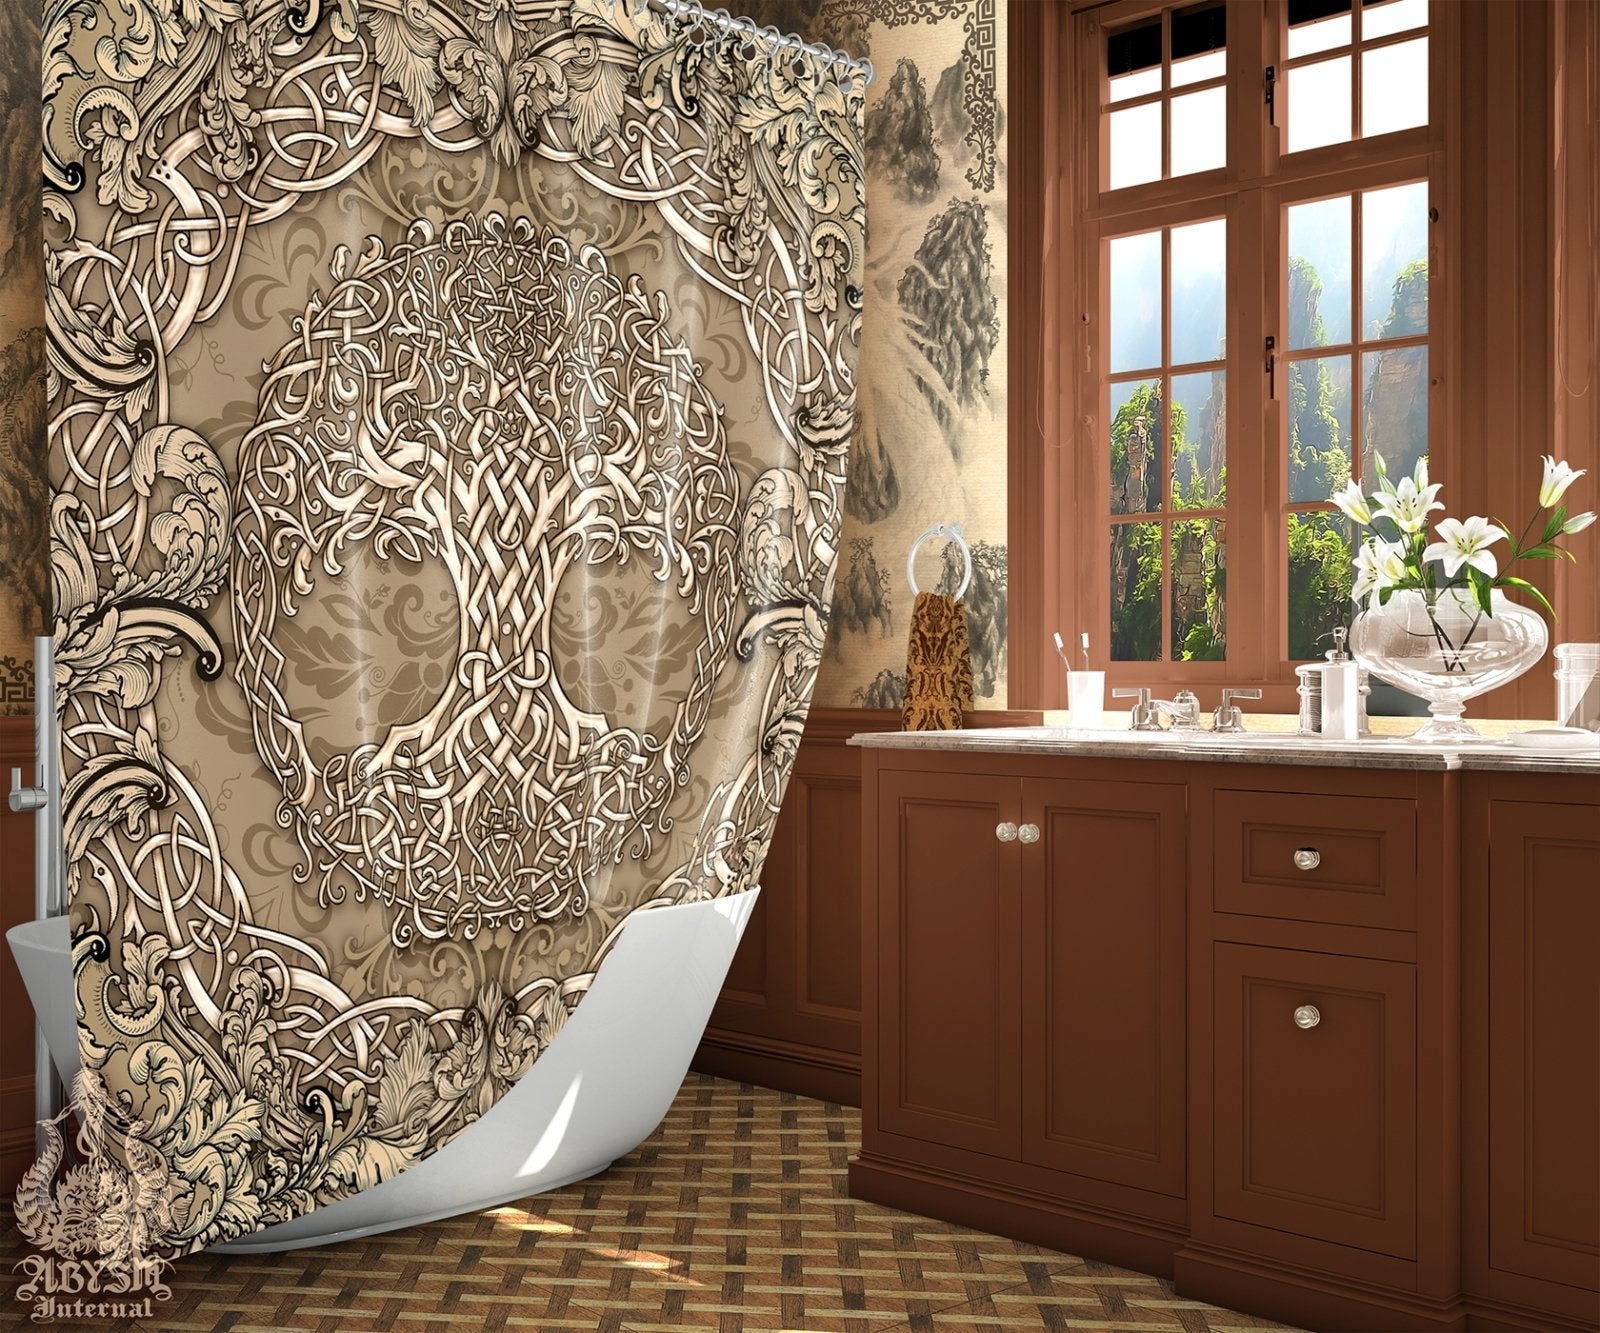 Boho Shower Curtain, Tree of Life, Indie Bathroom Decor, Pagan Art, Celtic Knot, Eclectic and Funky Home - Cream - Abysm Internal